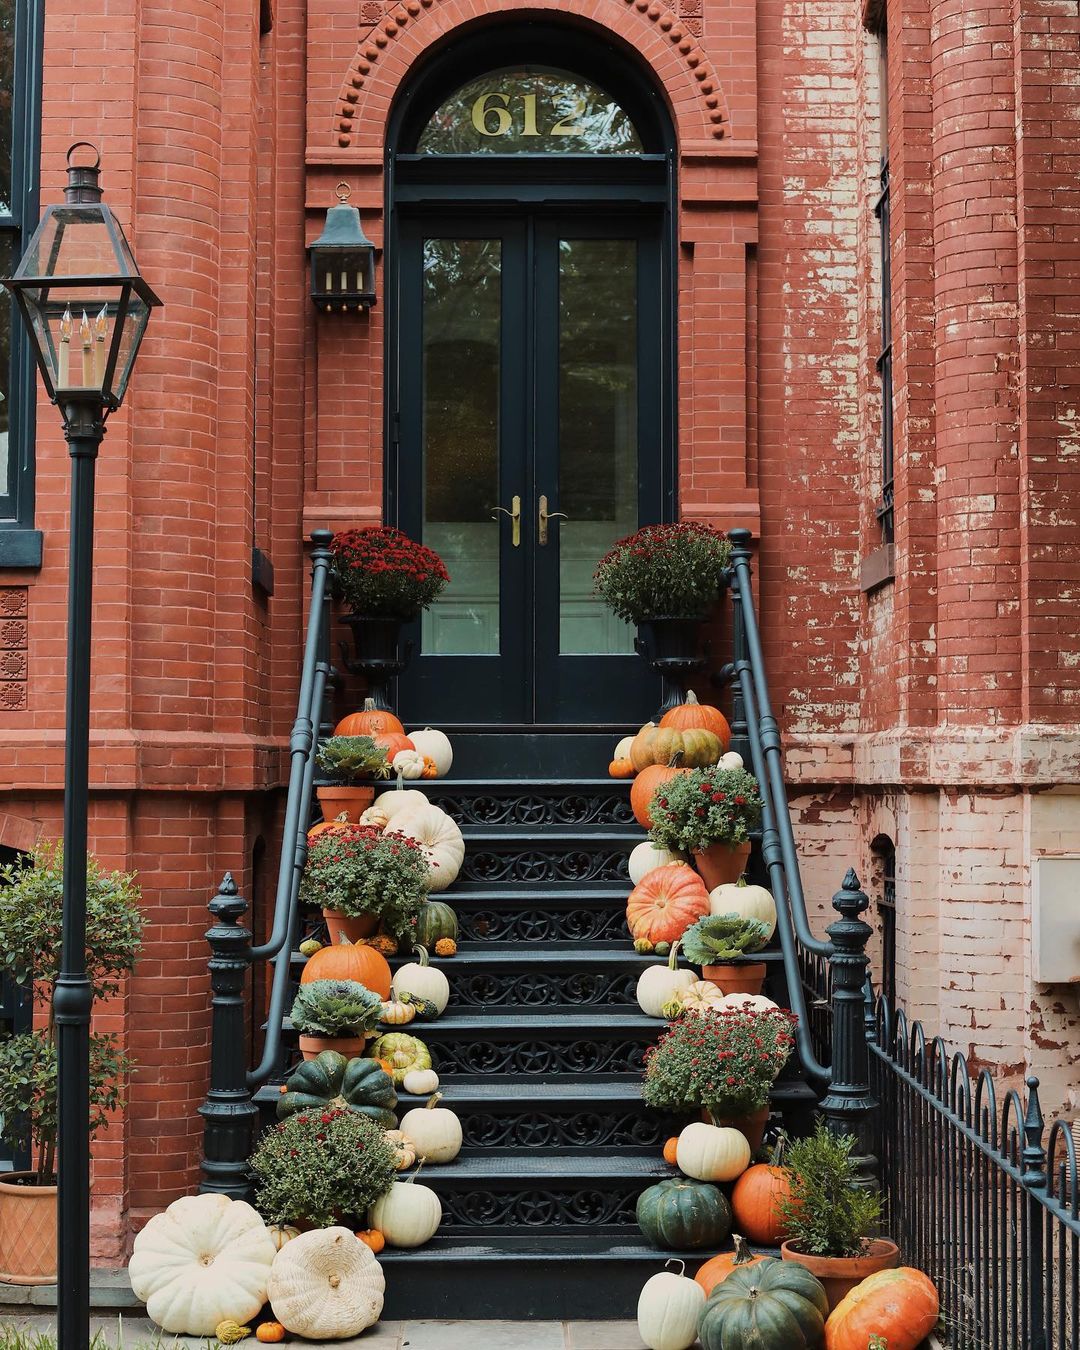 The exterior of a brick townhome with a set of stairs leading to the front door, with pumpkins placed on each step. Photo by Instagram user @jyoungdesignhouse.